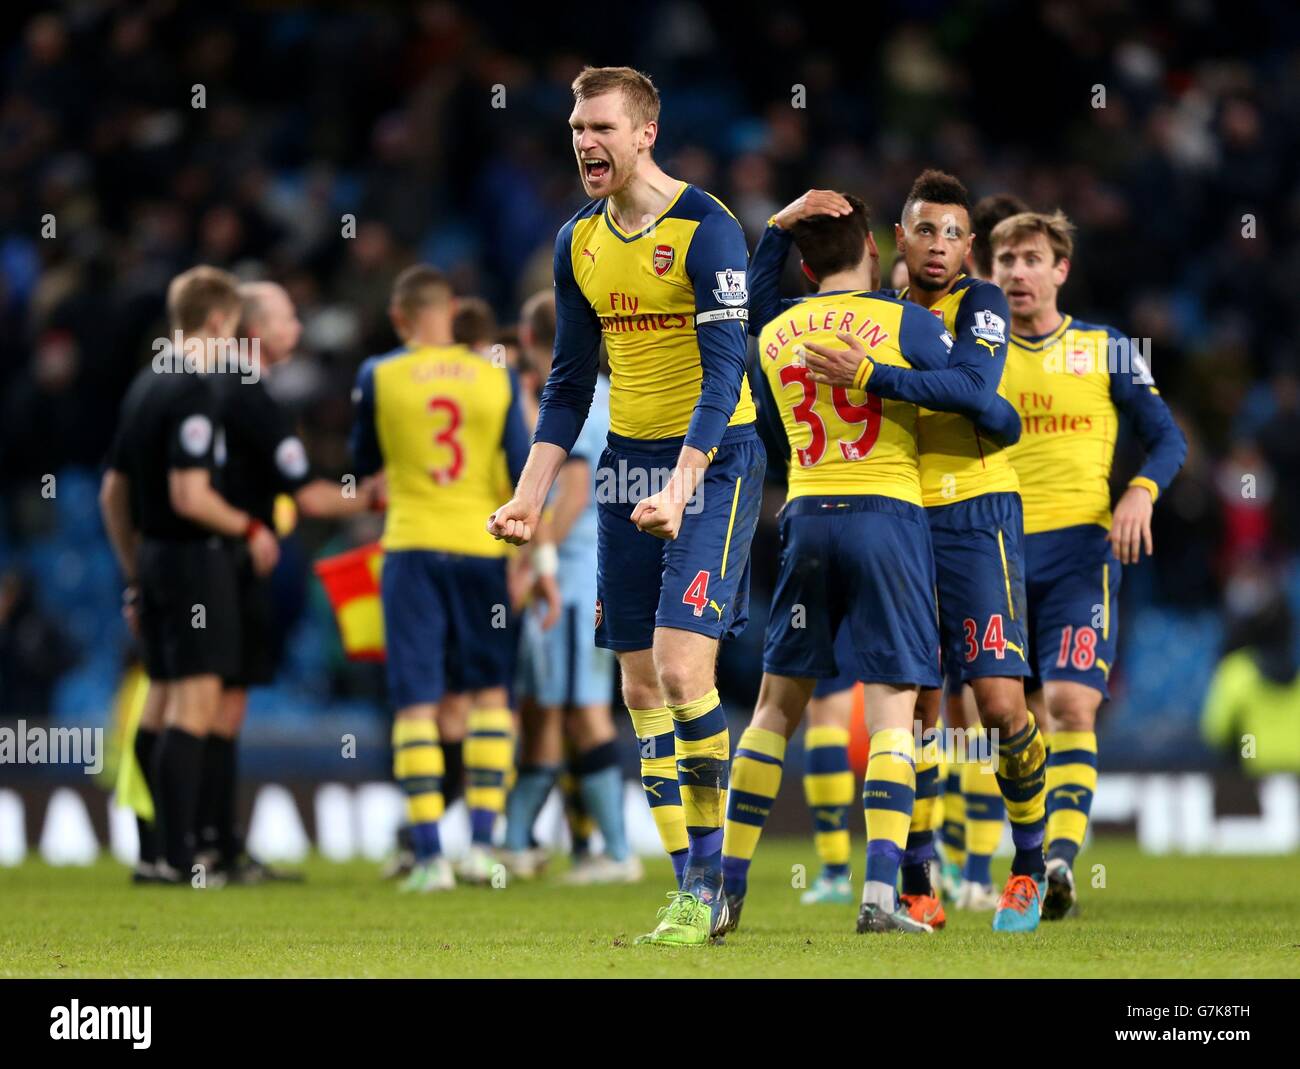 Soccer - Barclays Premier League - Manchester City v Arsenal - Etihad Stadium. Arsenal's Per Mertesacker celebrates after the final whistle during the Barclays Premier League match at the Etihad Stadium, Manchester. Stock Photo